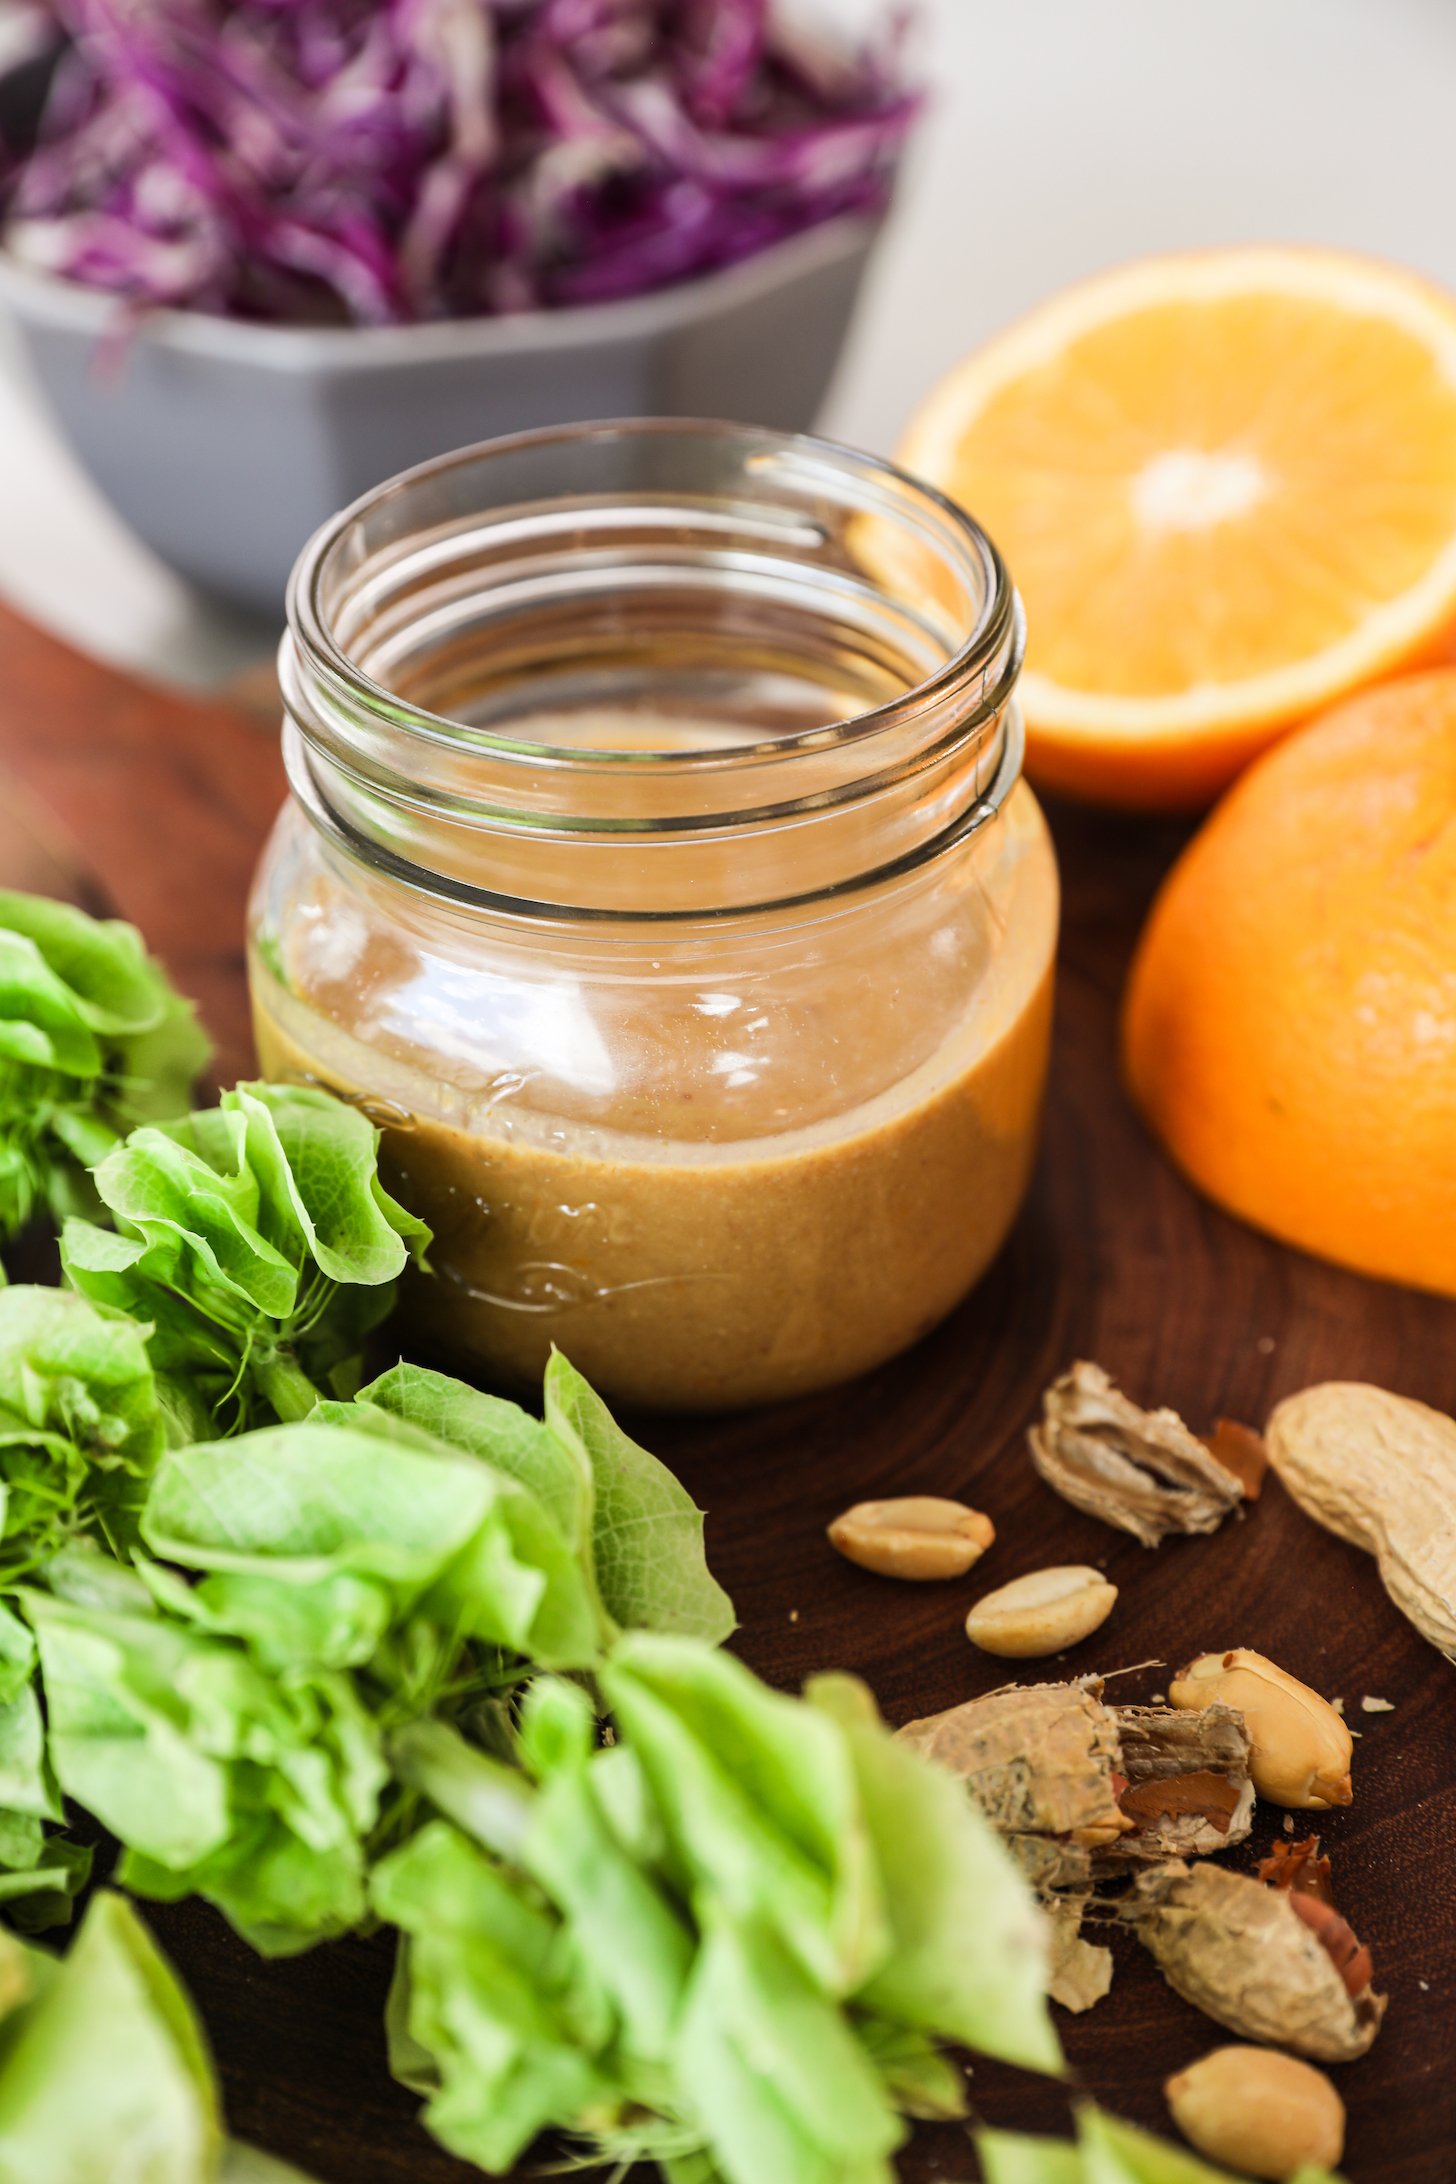 A perspective image of a small jar of dressing surrounded by an orange half, peanuts, sliced cabbage in the background and a green plant in the foreground.